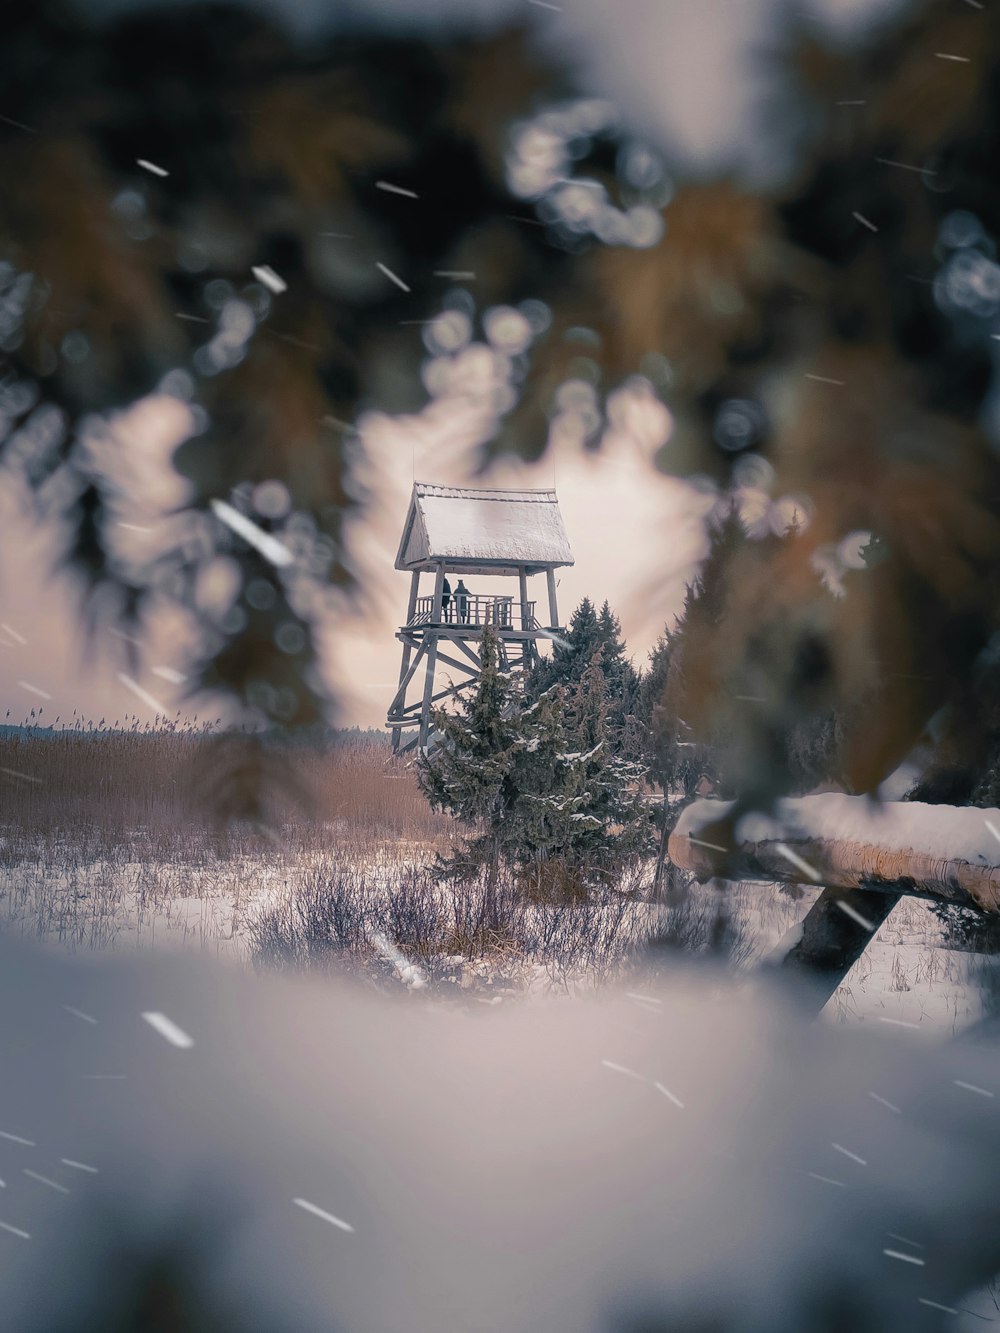 a small tower in the middle of a snowy field